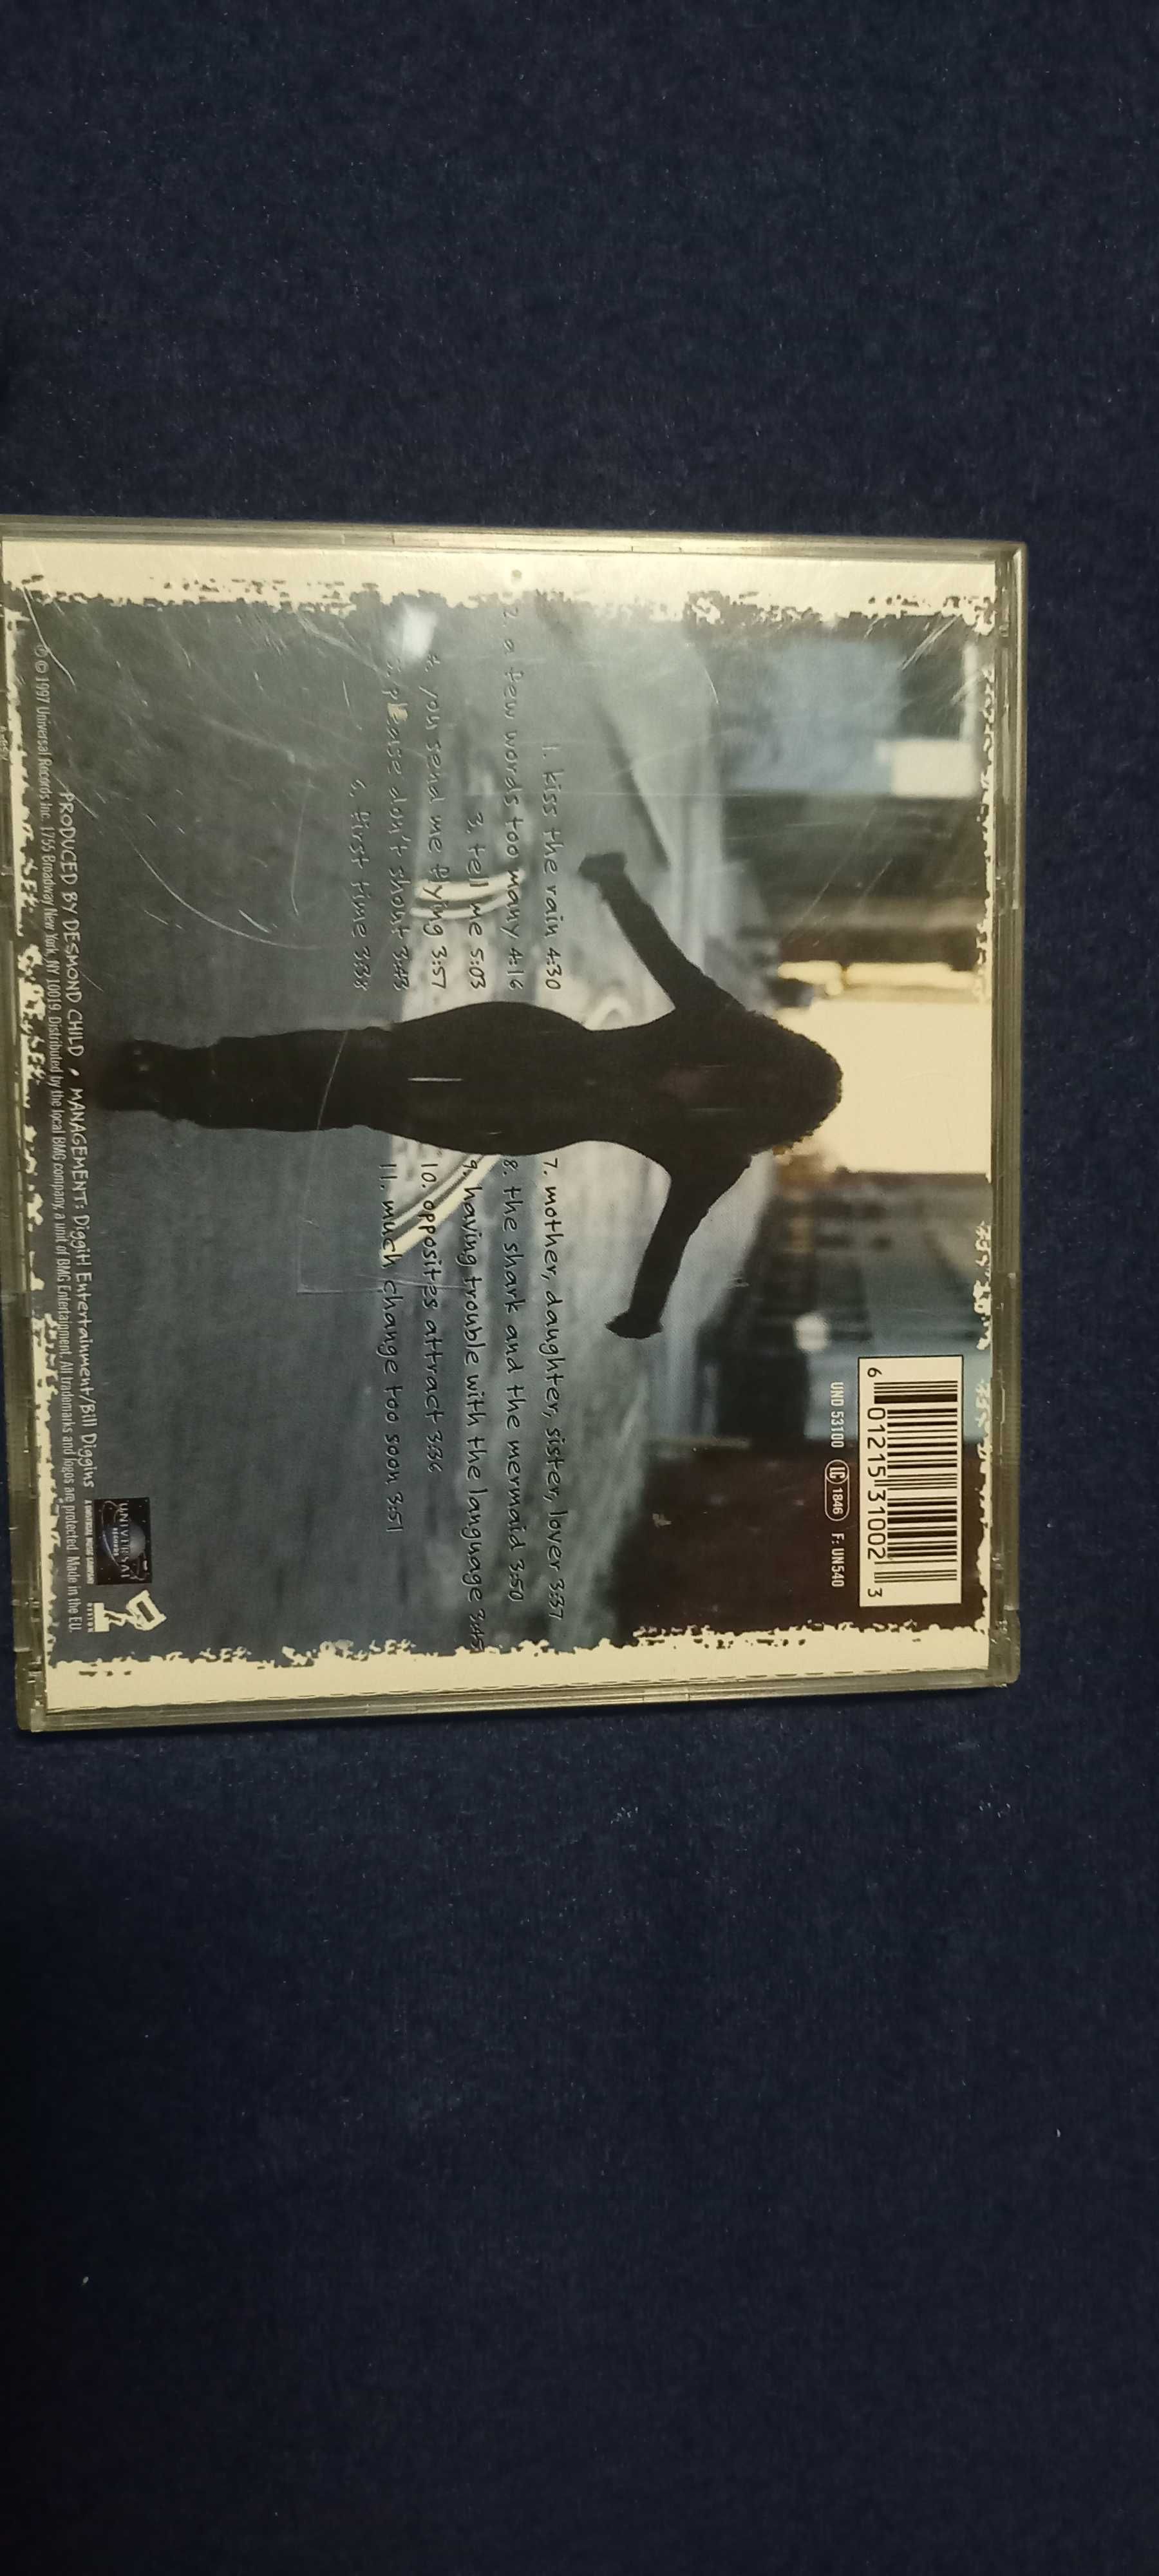 CD Billie Myers growing pains 1997